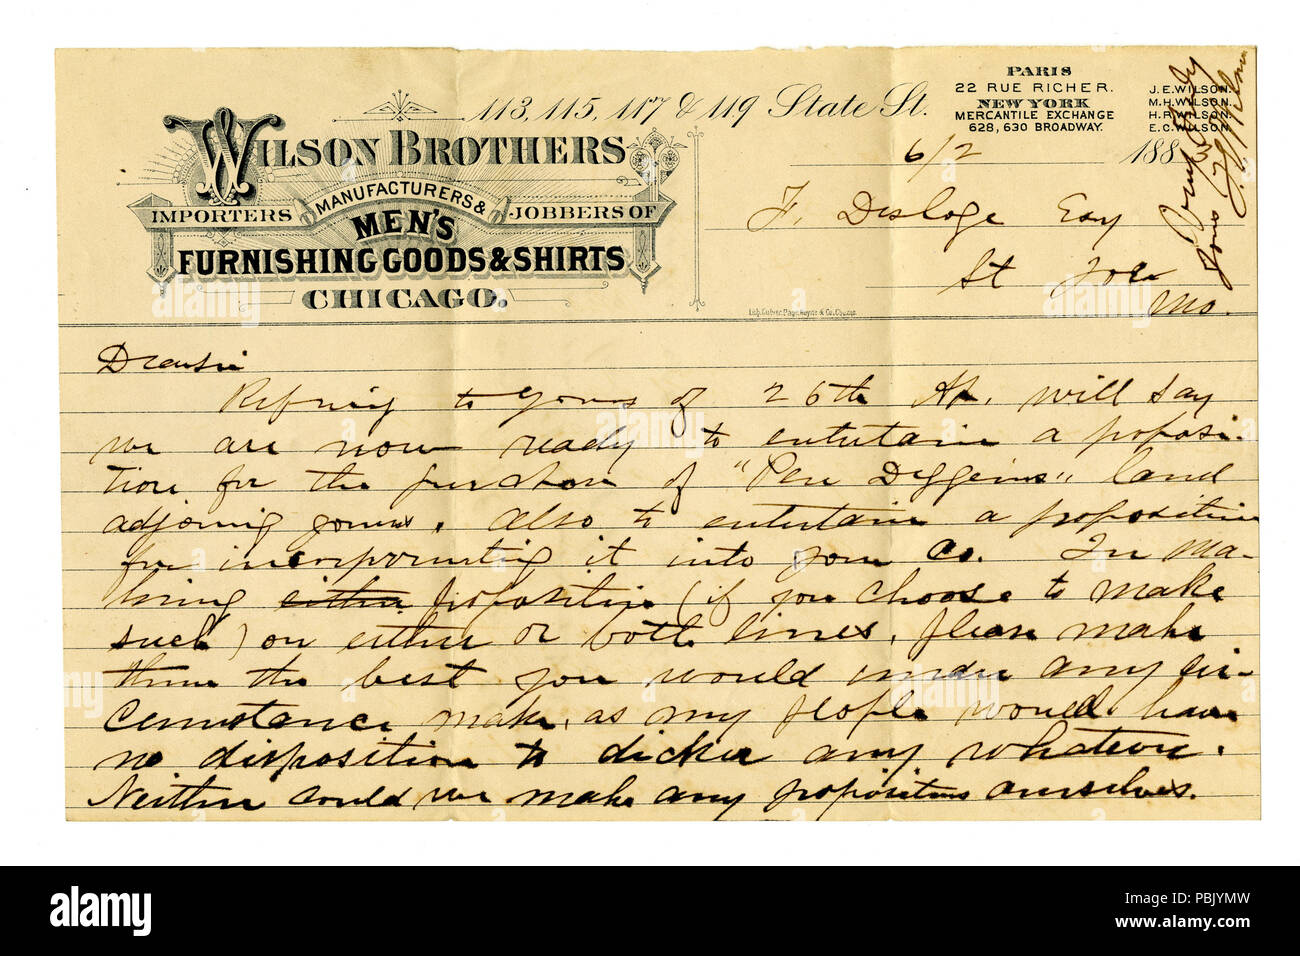 909 Letter signed James H. Wilson, Wilson Brothers, Importers Manufacturers and Jobbers of Men’s Furnishing Goods and Shirts, Chicago, to Firmin Desloge, June 2, 1883 Stock Photo